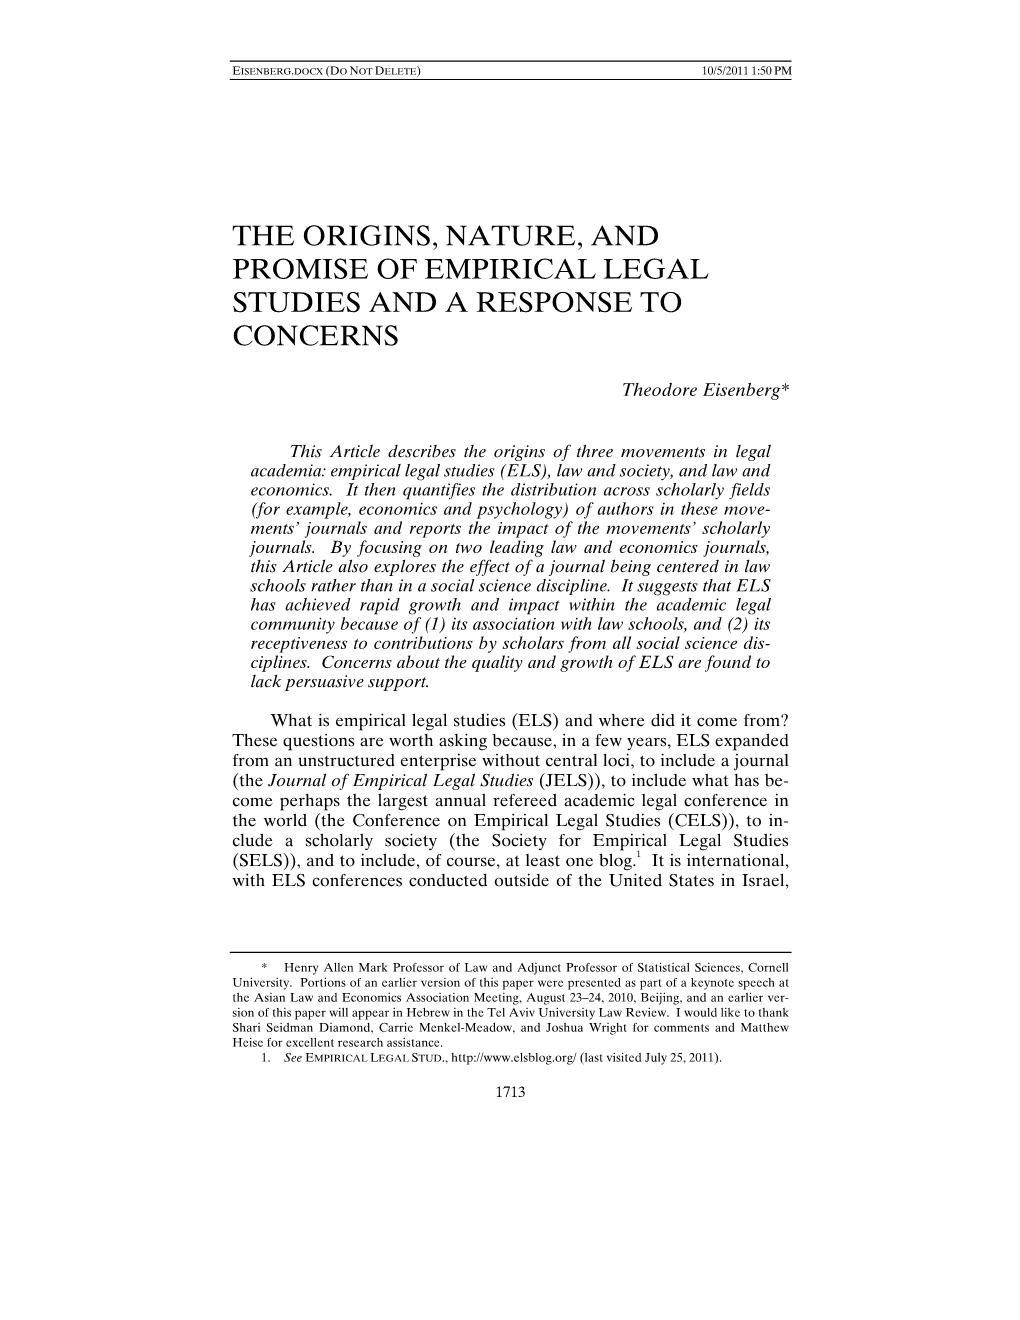 The Origins, Nature, and Promise of Empirical Legal Studies and a Response to Concerns